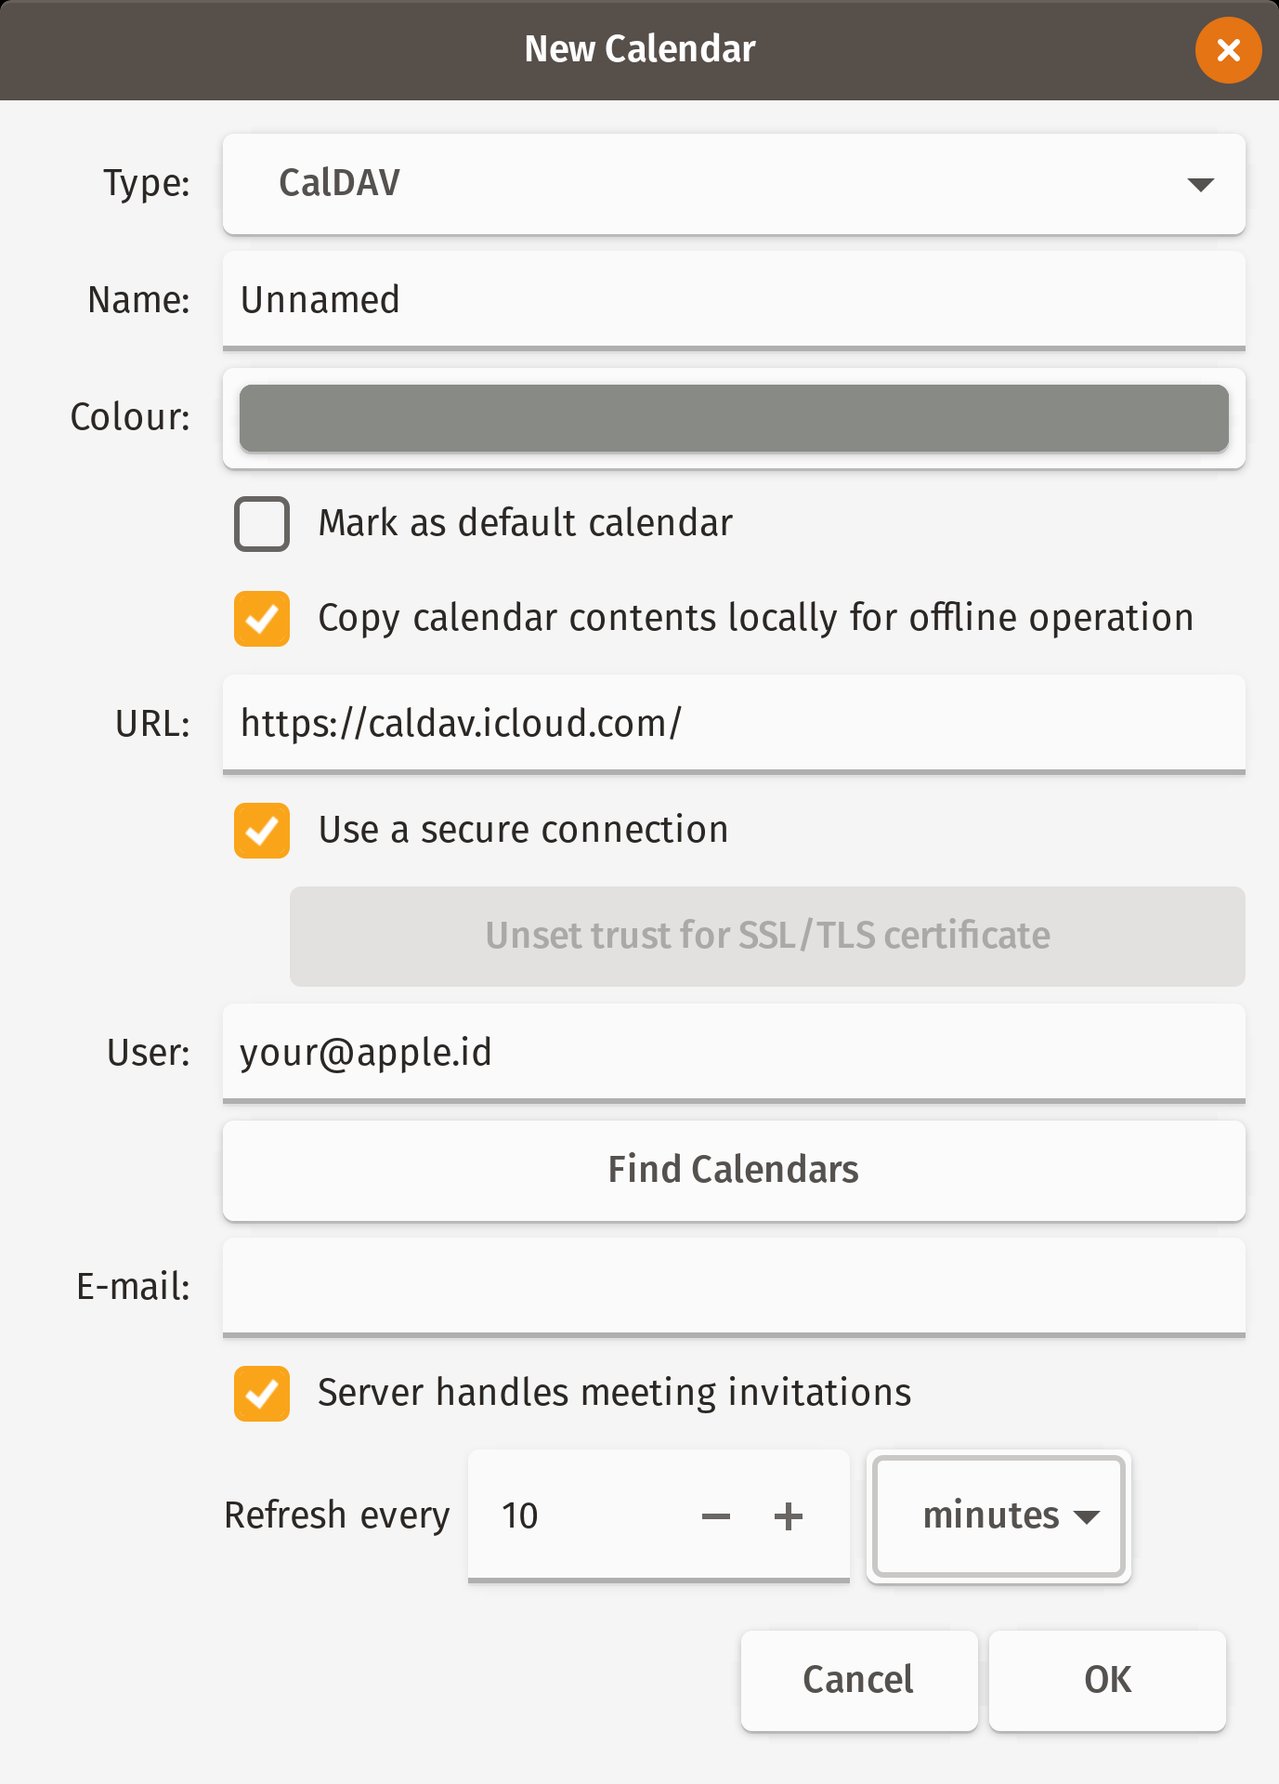 Screenshot of the New Calendar window. All of the settings shown are described in the instructions here.